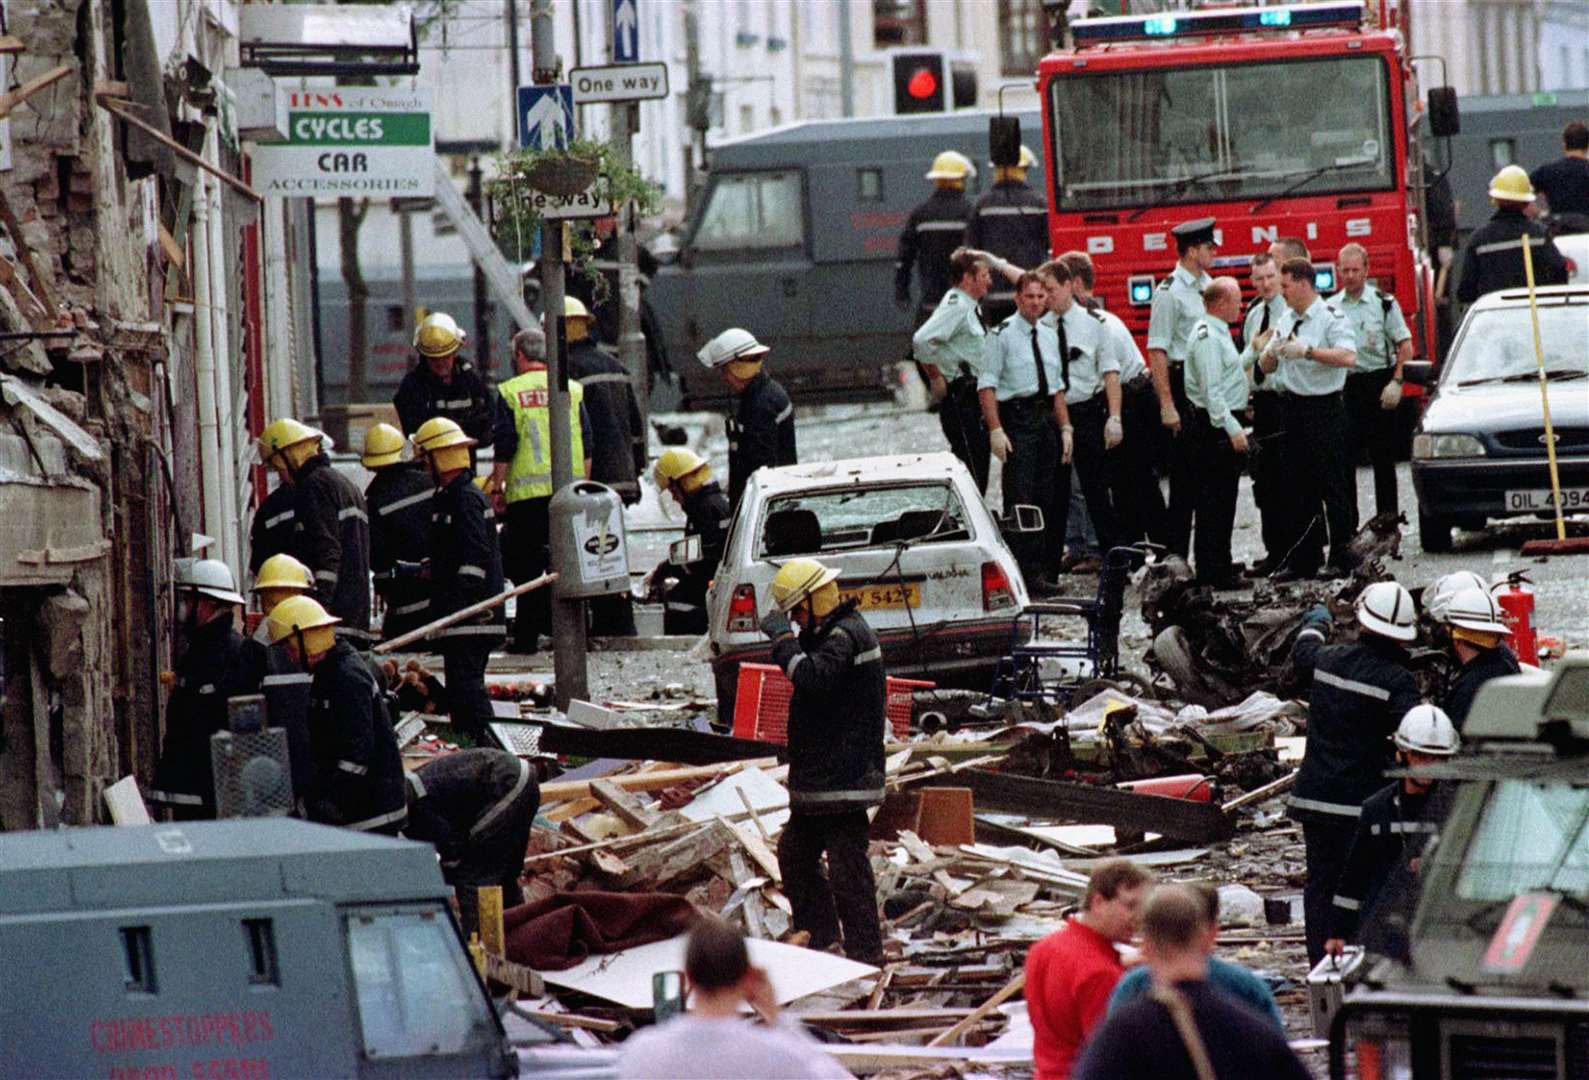 A total of 29 people died in the Omagh bomb blast (Paul McErlane/PA)